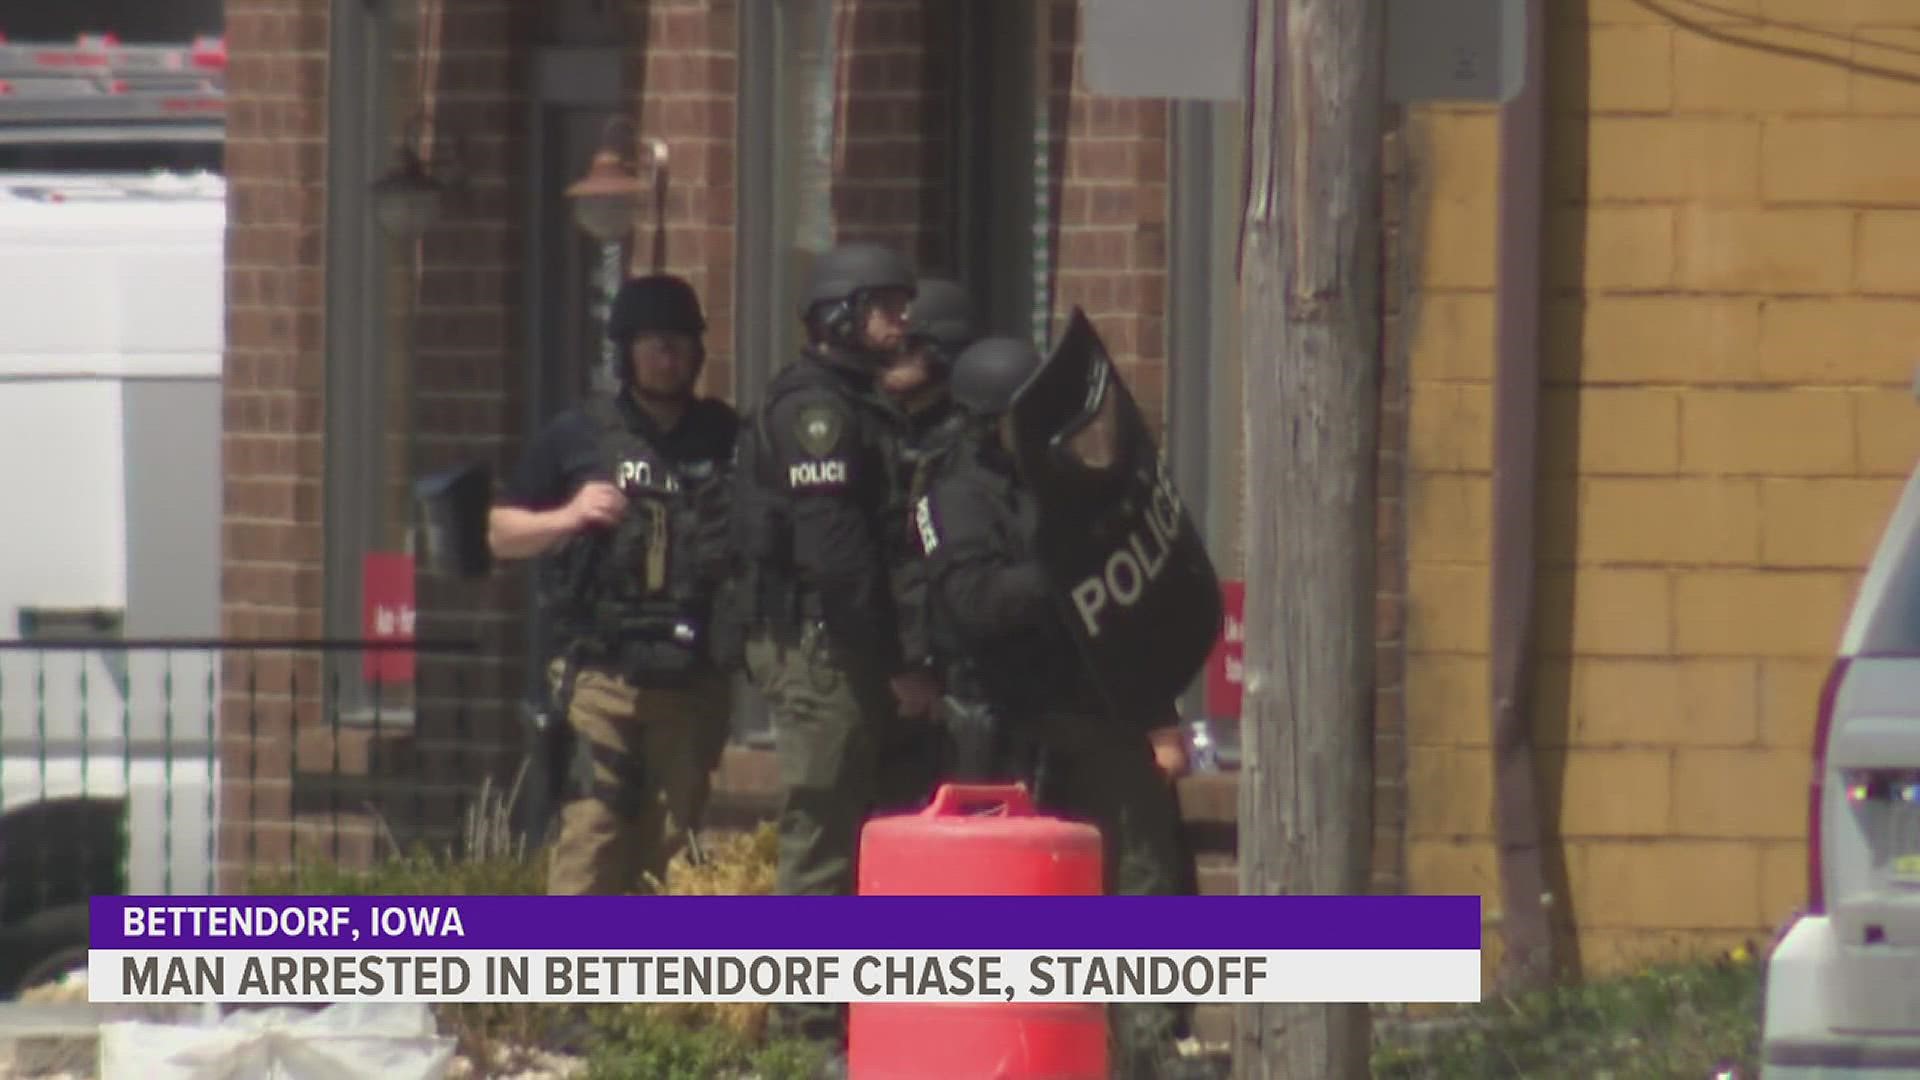 An area around a home in the 1600 block of Grant Street was shut down for about two hours after a man led police on a chase and caused a standoff.